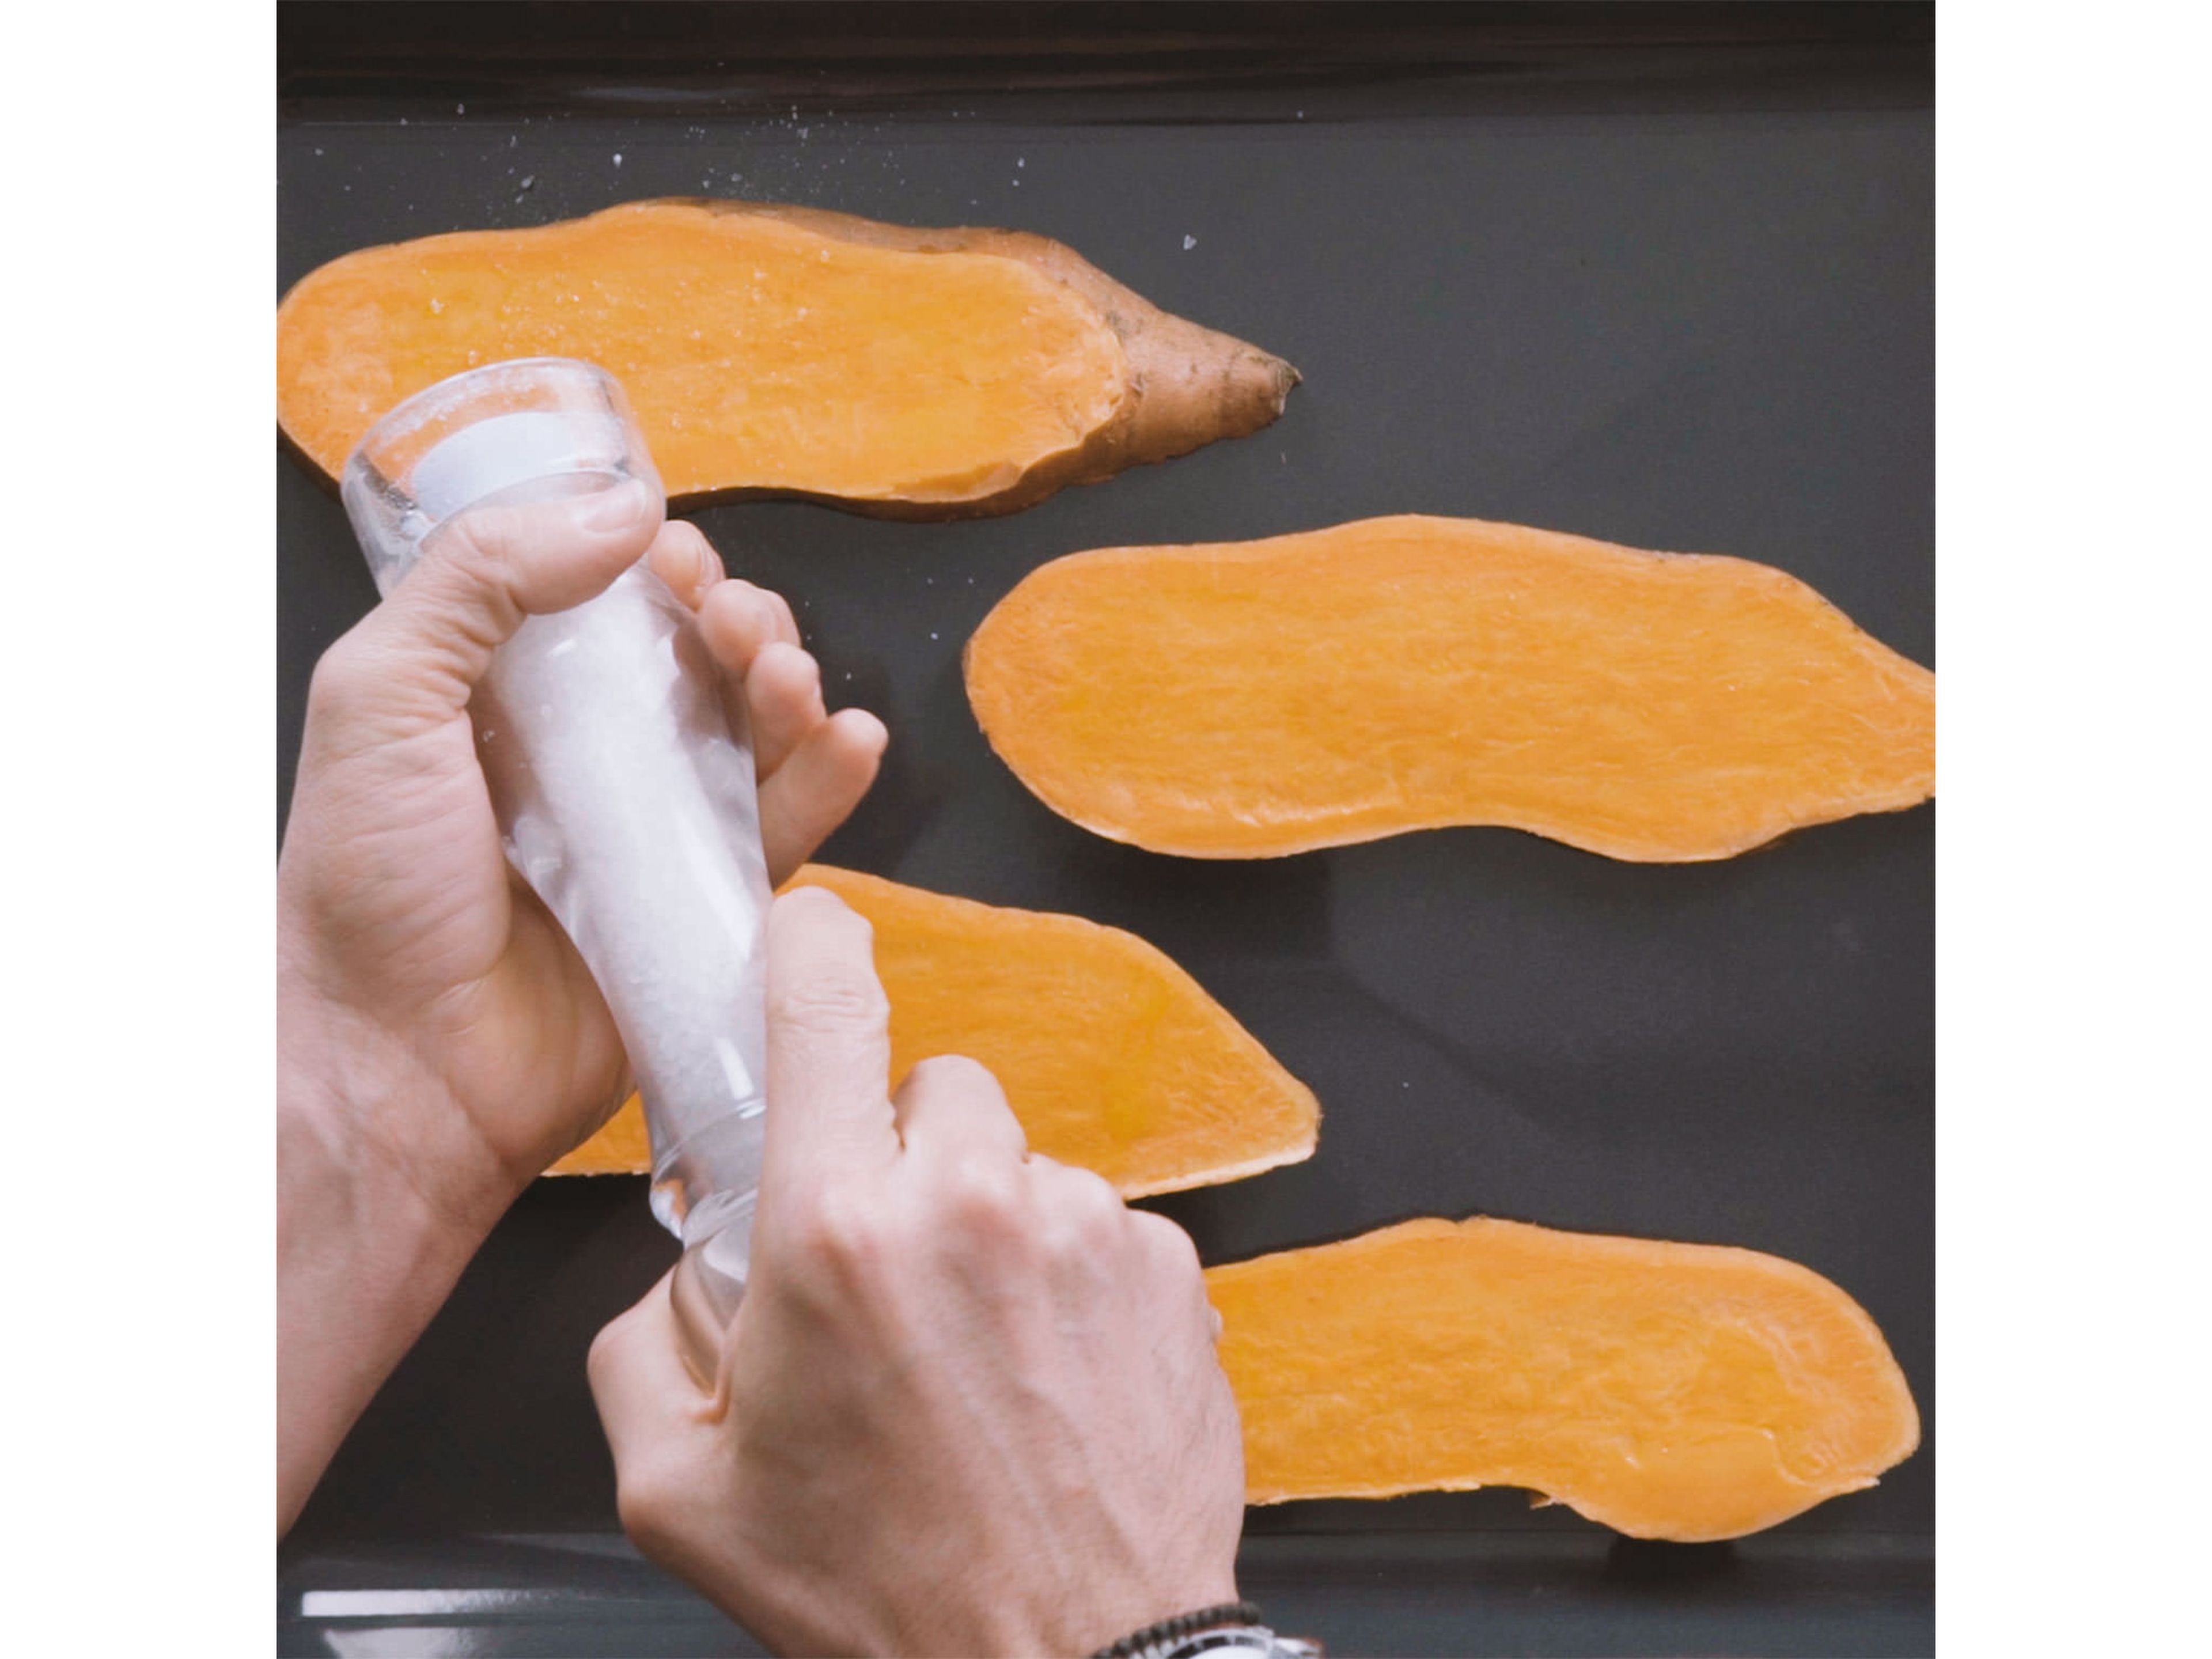 Preheat oven to 180°C/355°F. Cut sweet potato into 1/3-in. thick slices and transfer to a parchment-lined baking sheet. Brush oil on both sides of slices and season with salt. Transfer to oven and bake for approx. 15 min.